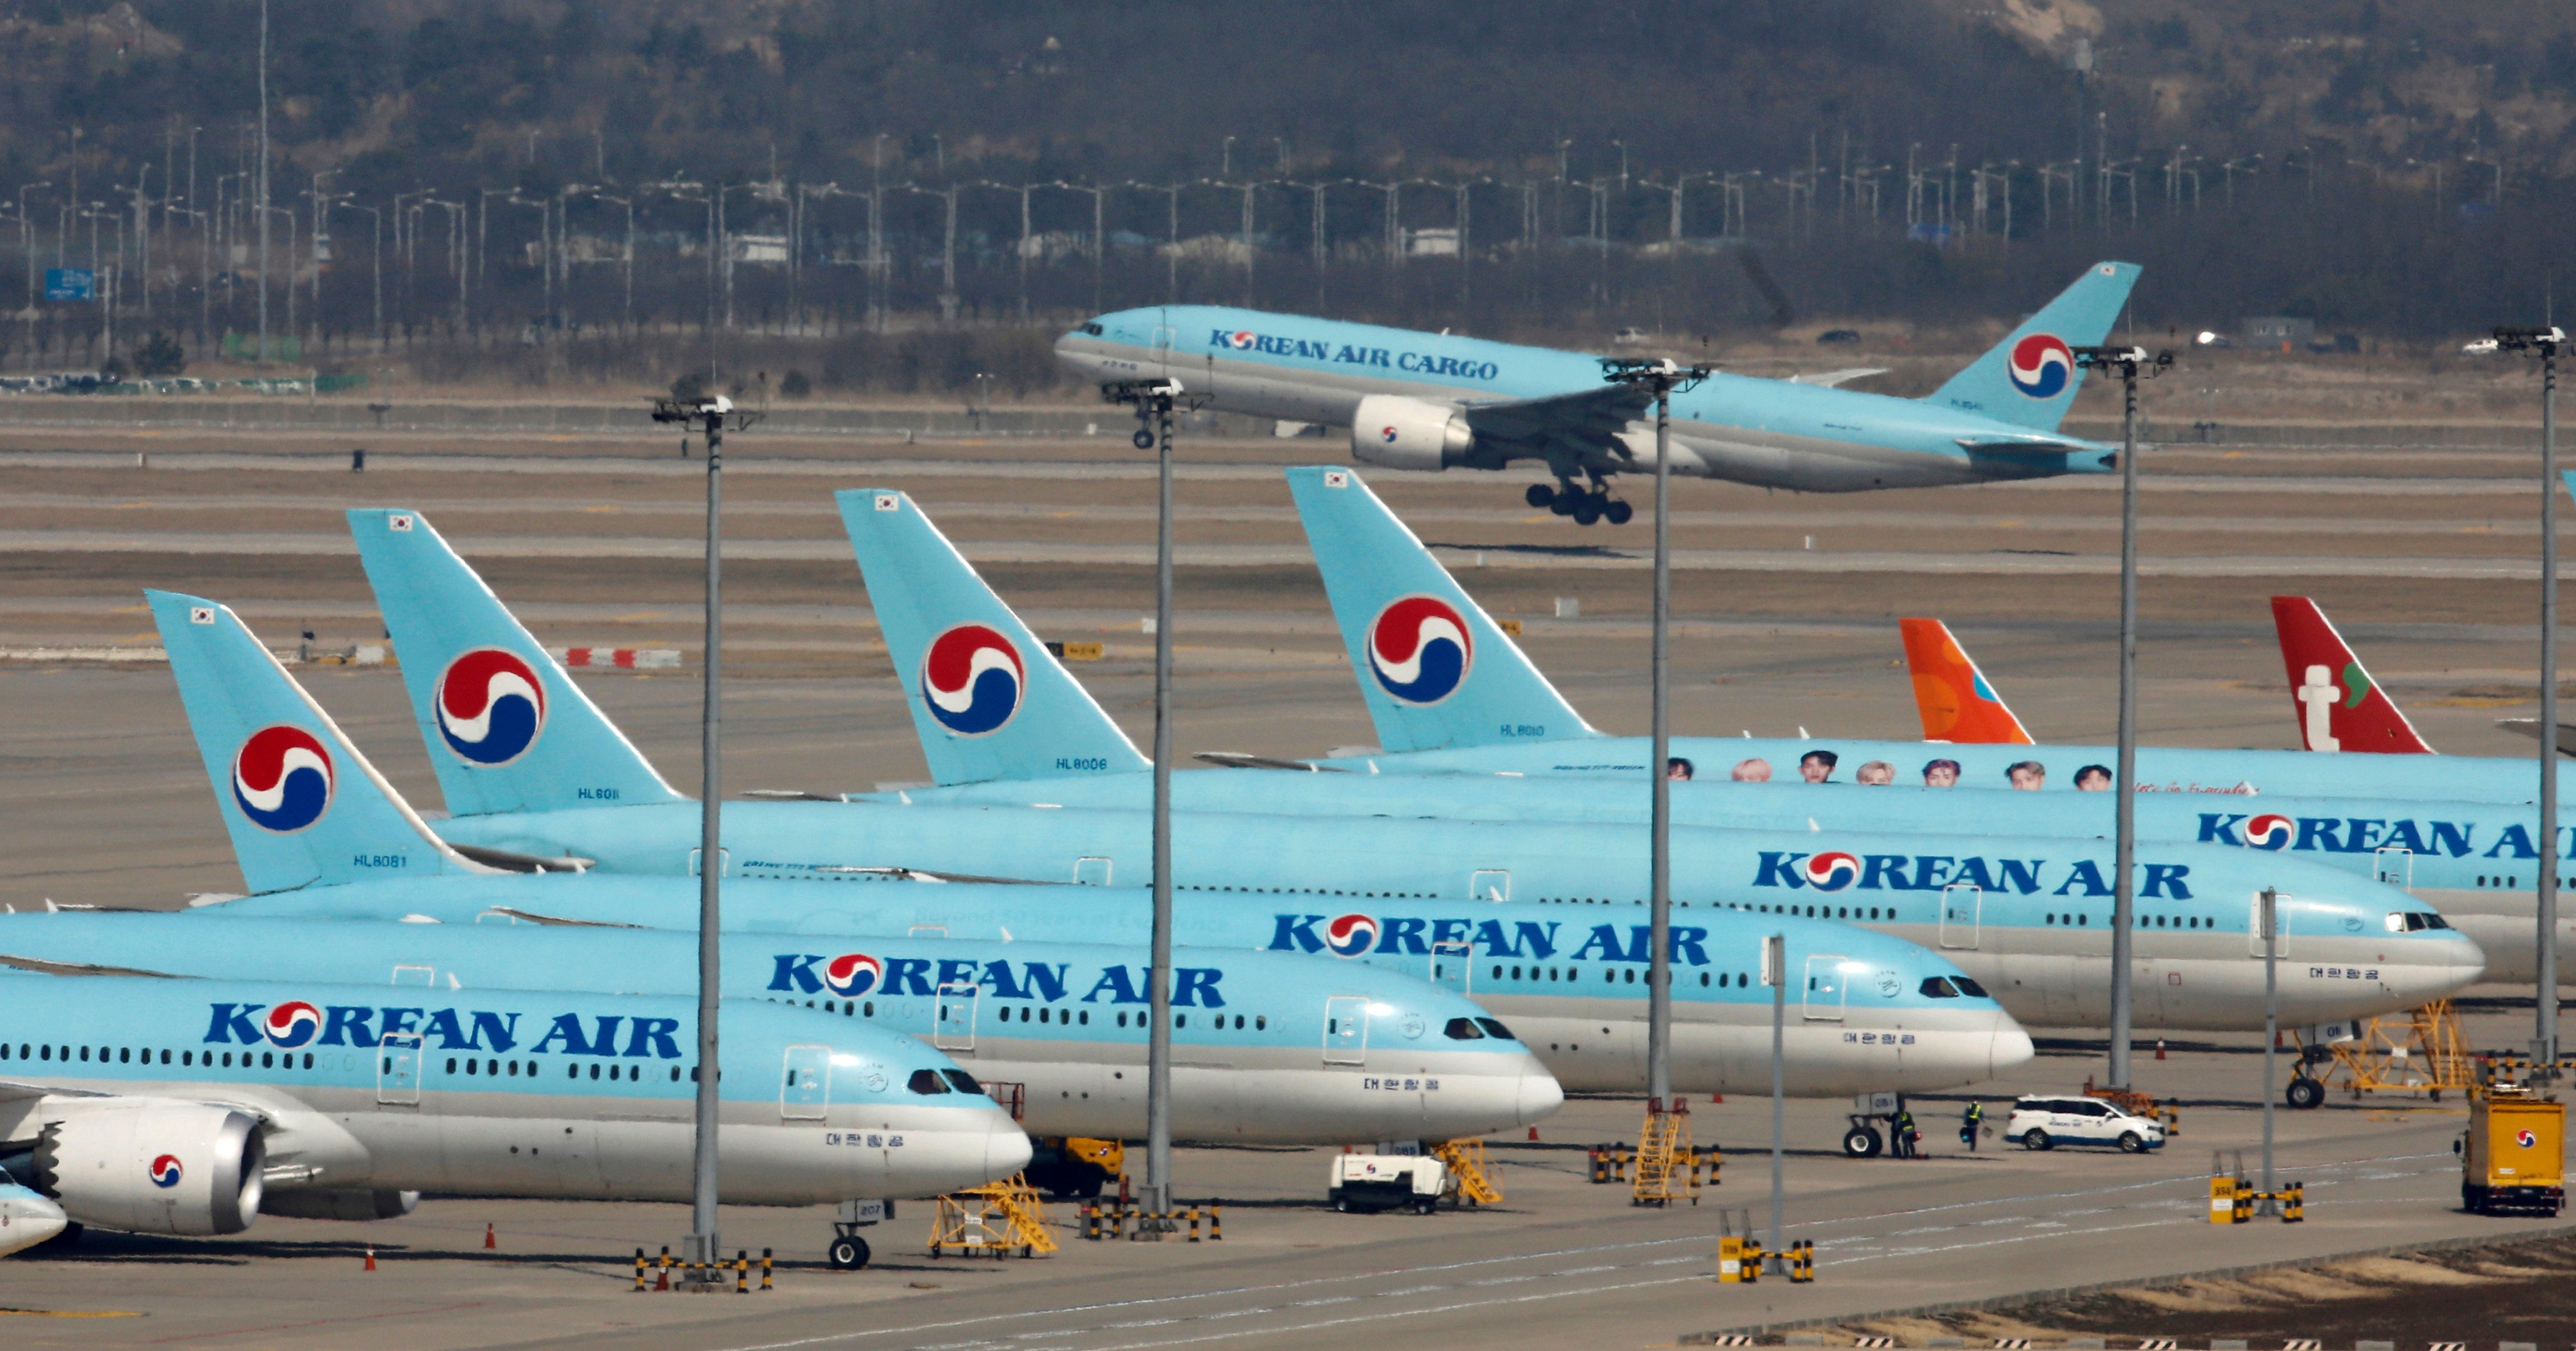 Korean Air passenger planes are seen parked on the tarmac at Incheon Airport in South Korea. Photo: Reuters